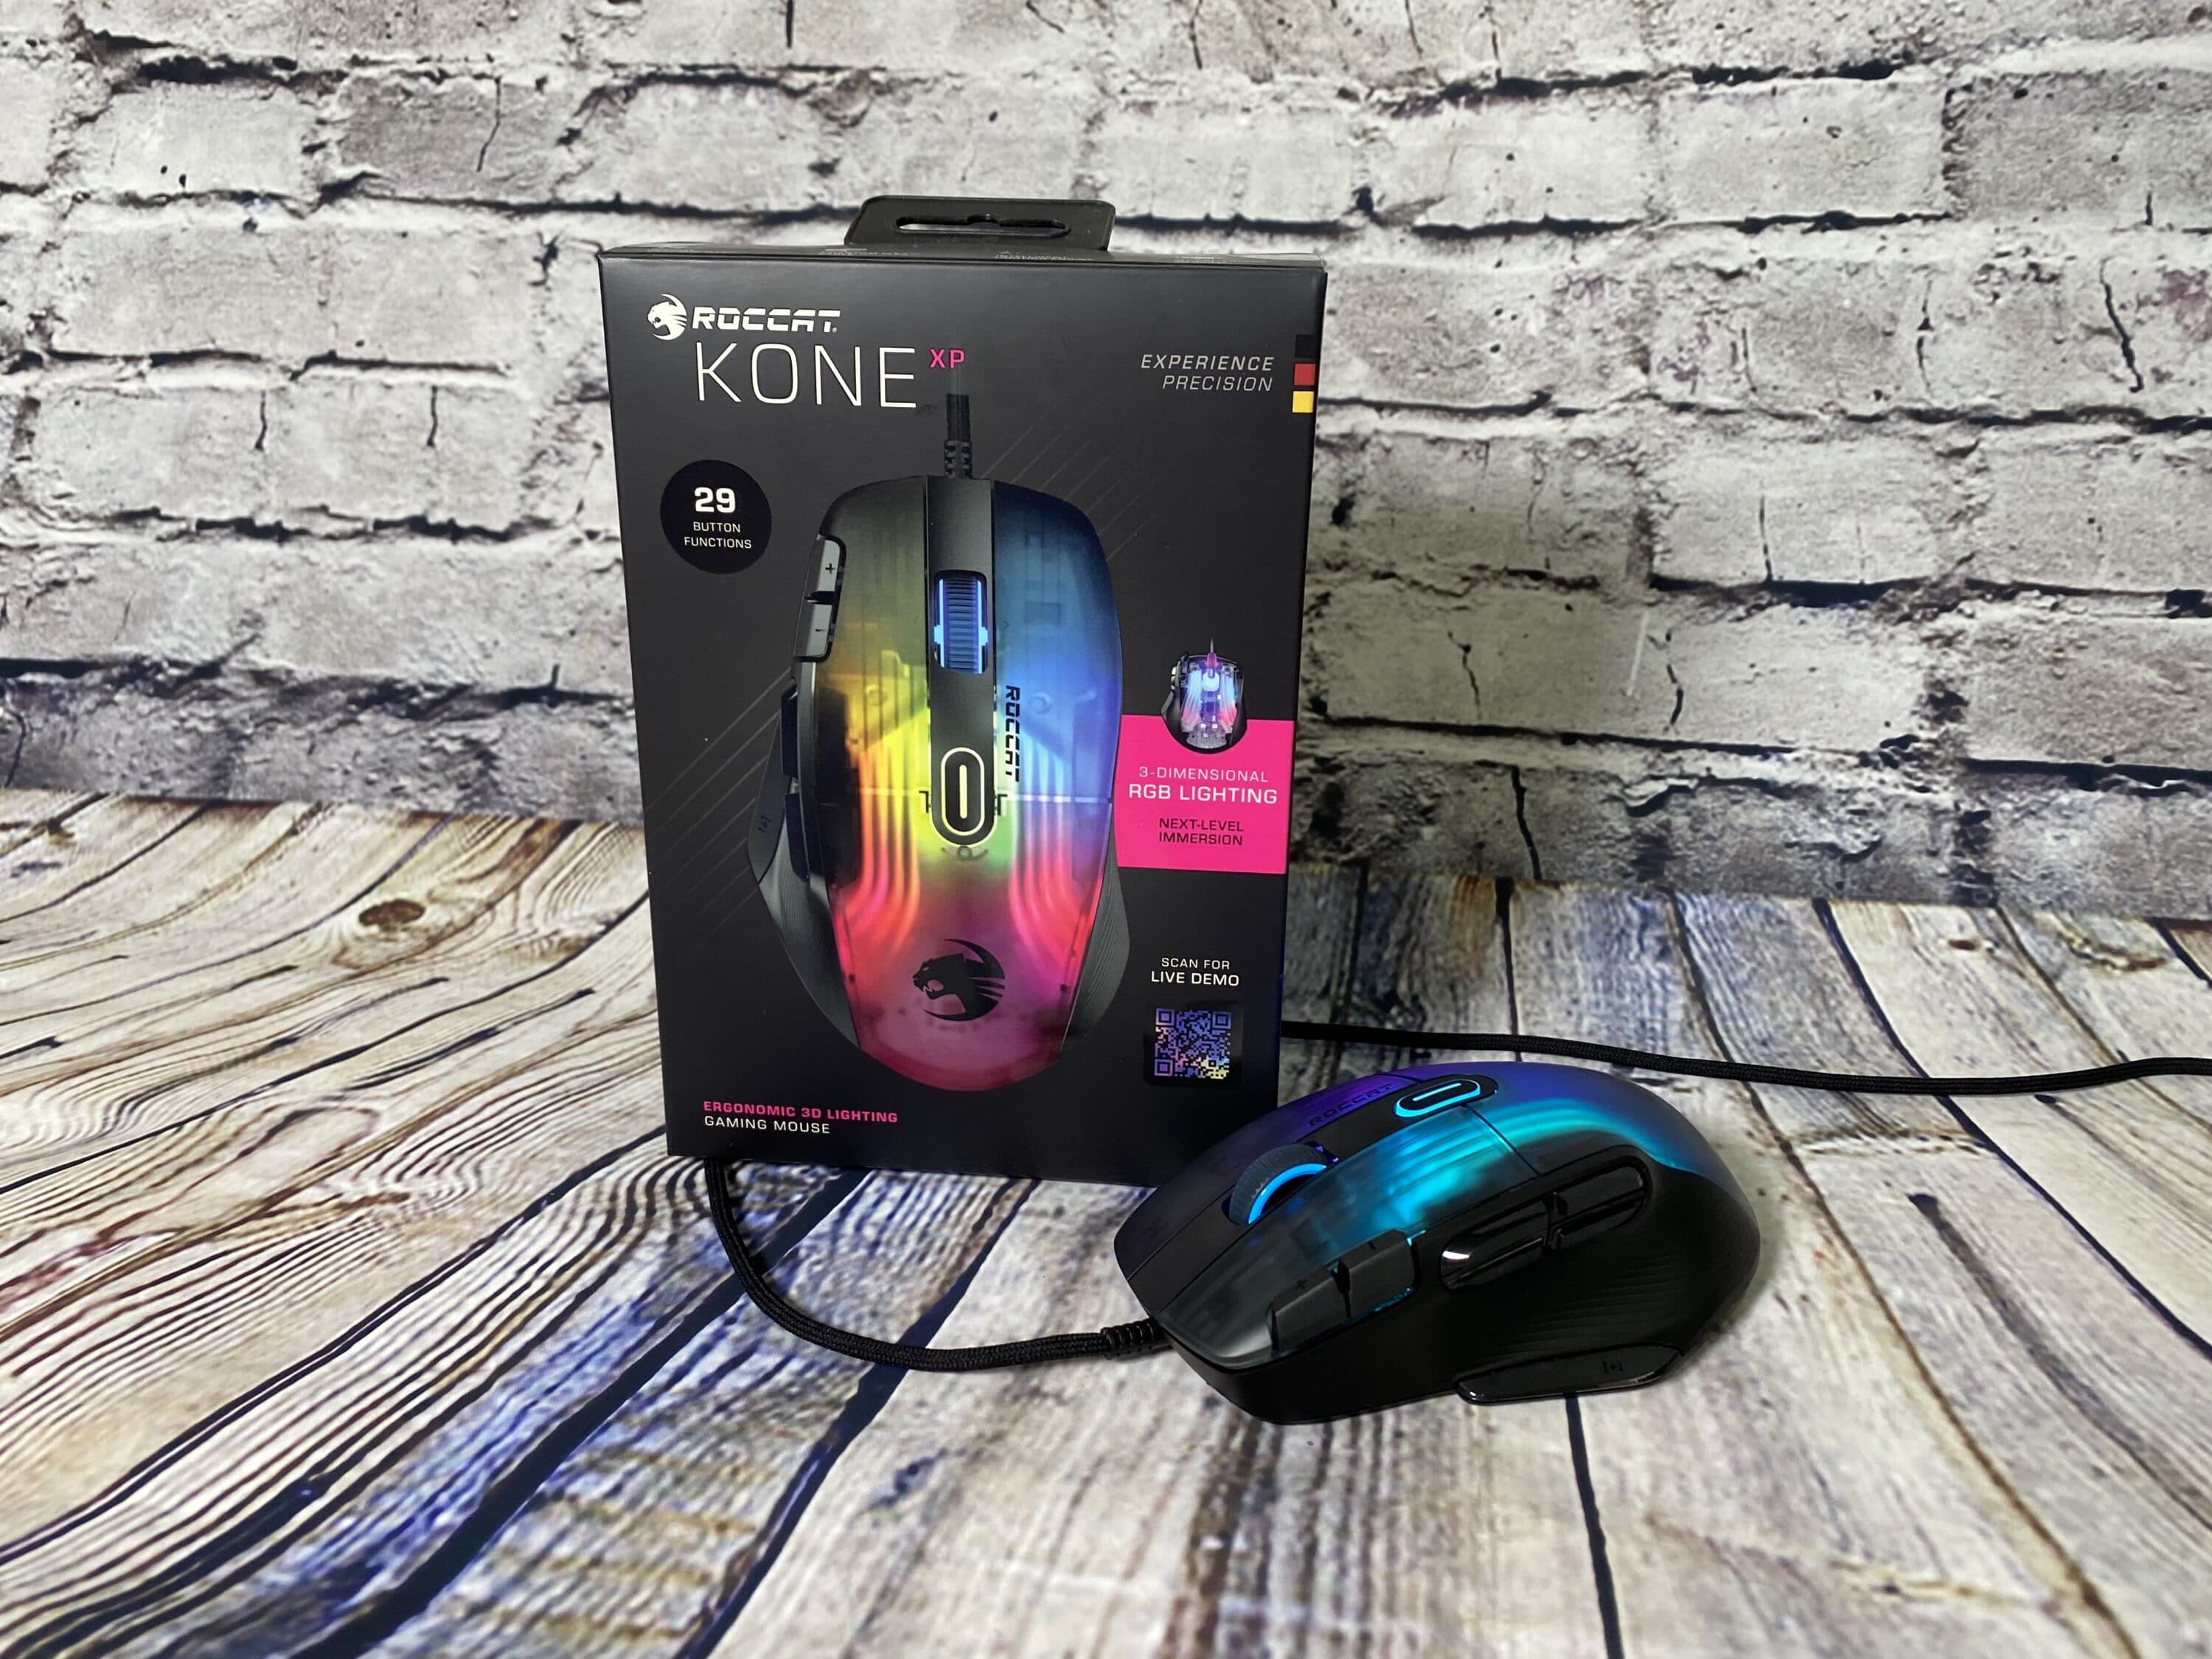 ROCCAT Kone XP review - gaming mouse with 29 possible button actions